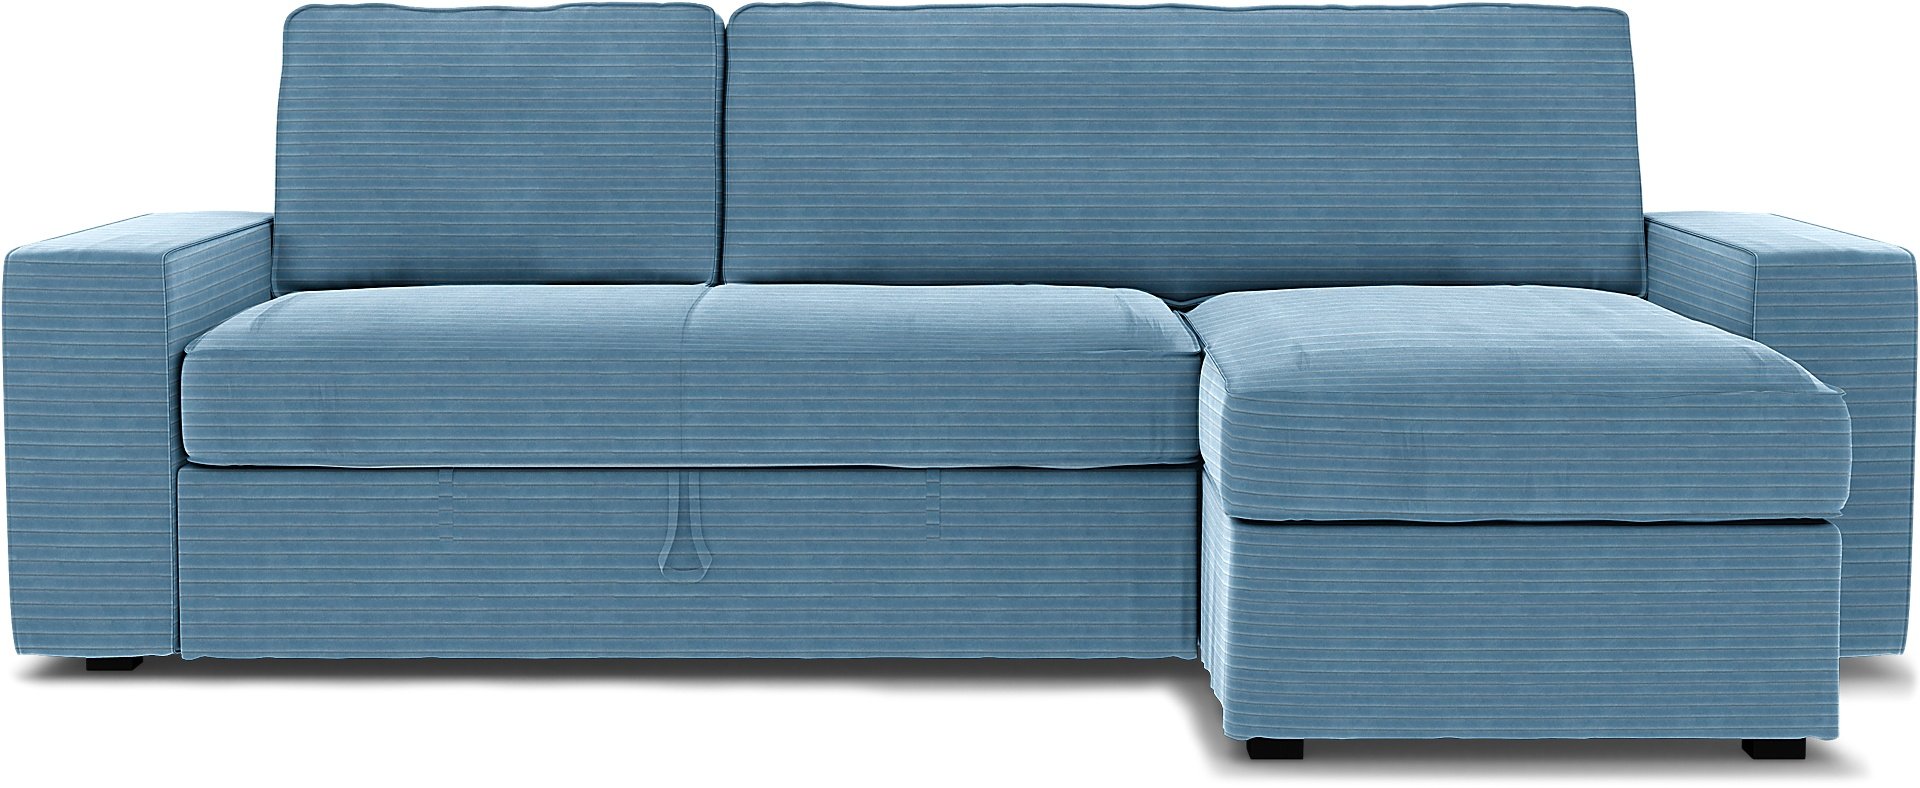 IKEA - Vilasund sofa bed with chaise cover, Sky Blue, Corduroy - Bemz